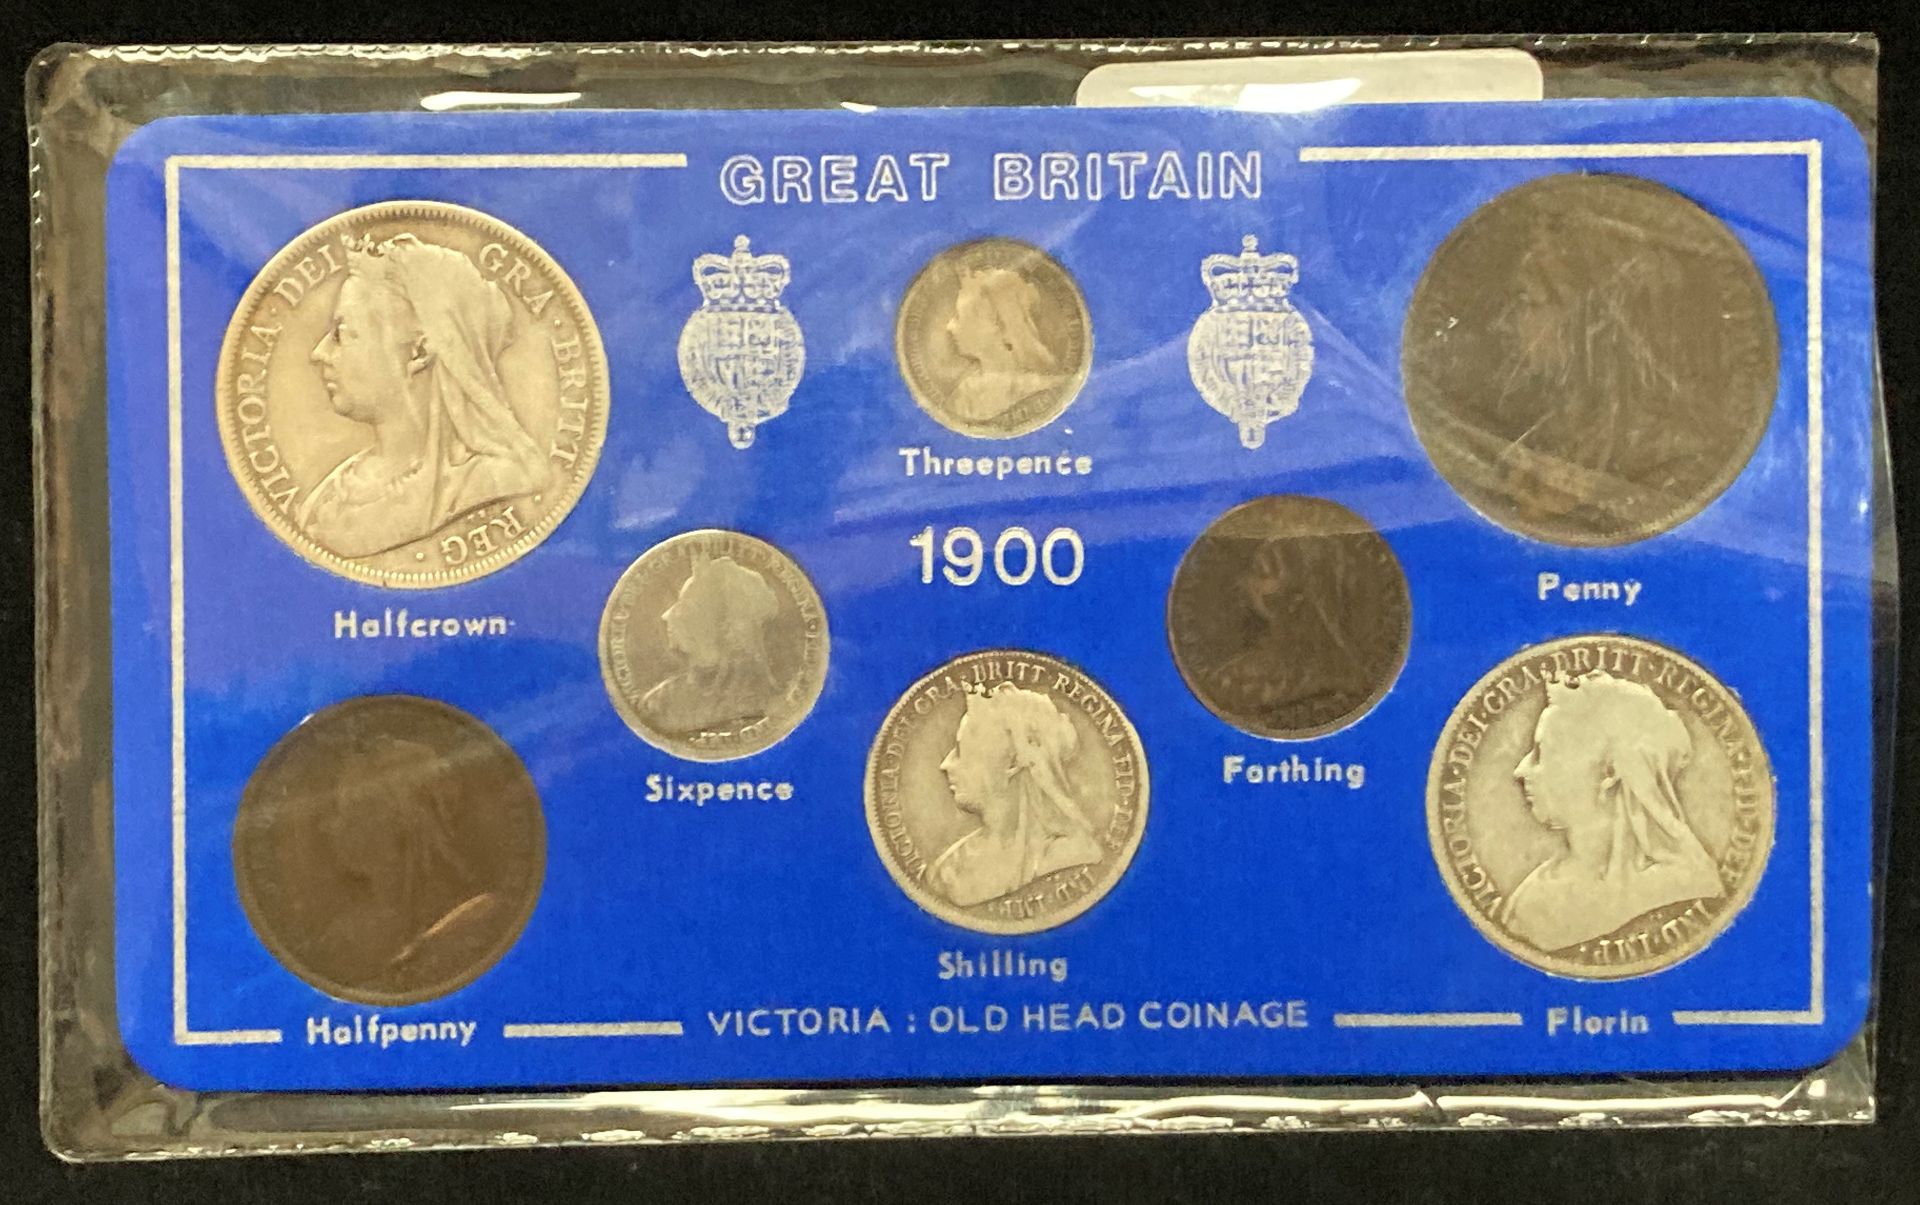 A Great Britain 1900 packaged Queen Victoria old head eight piece coin set.